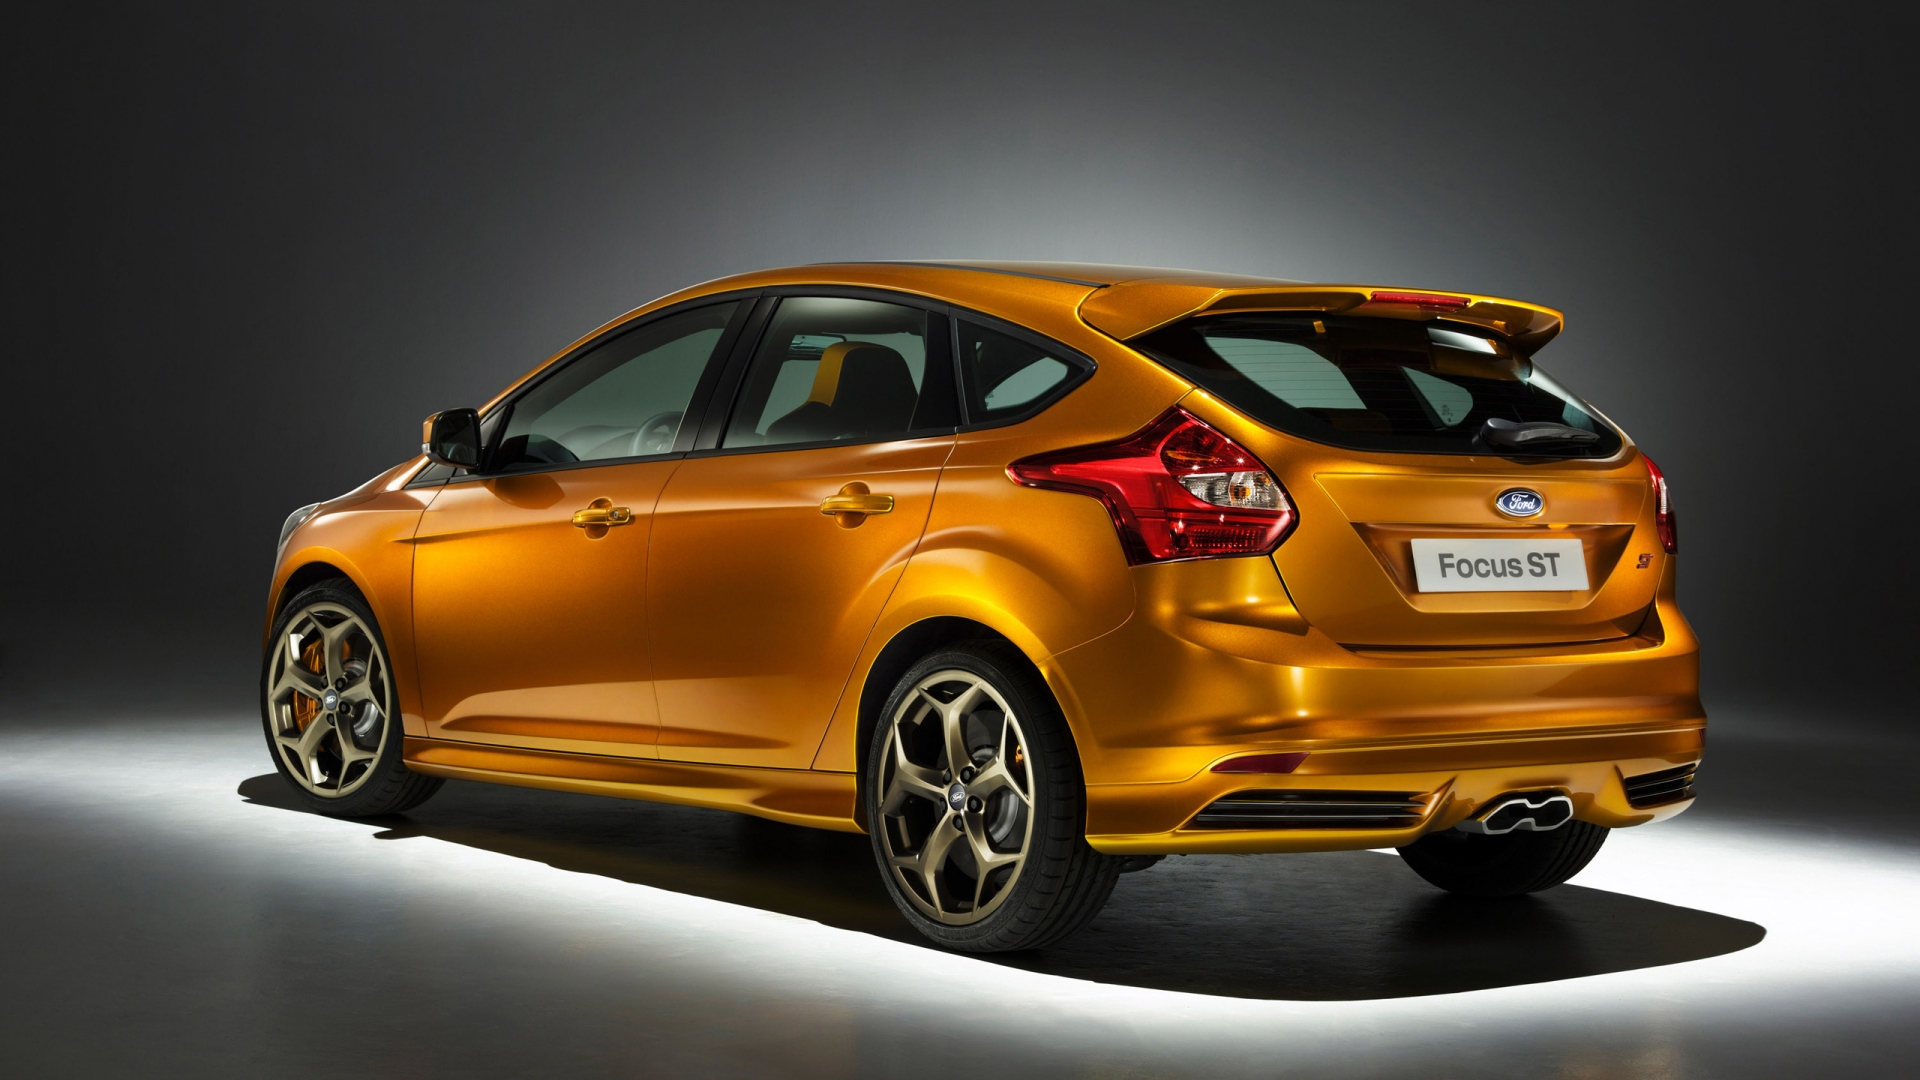 2012 Ford Focus ST for 1920 x 1080 HDTV 1080p resolution